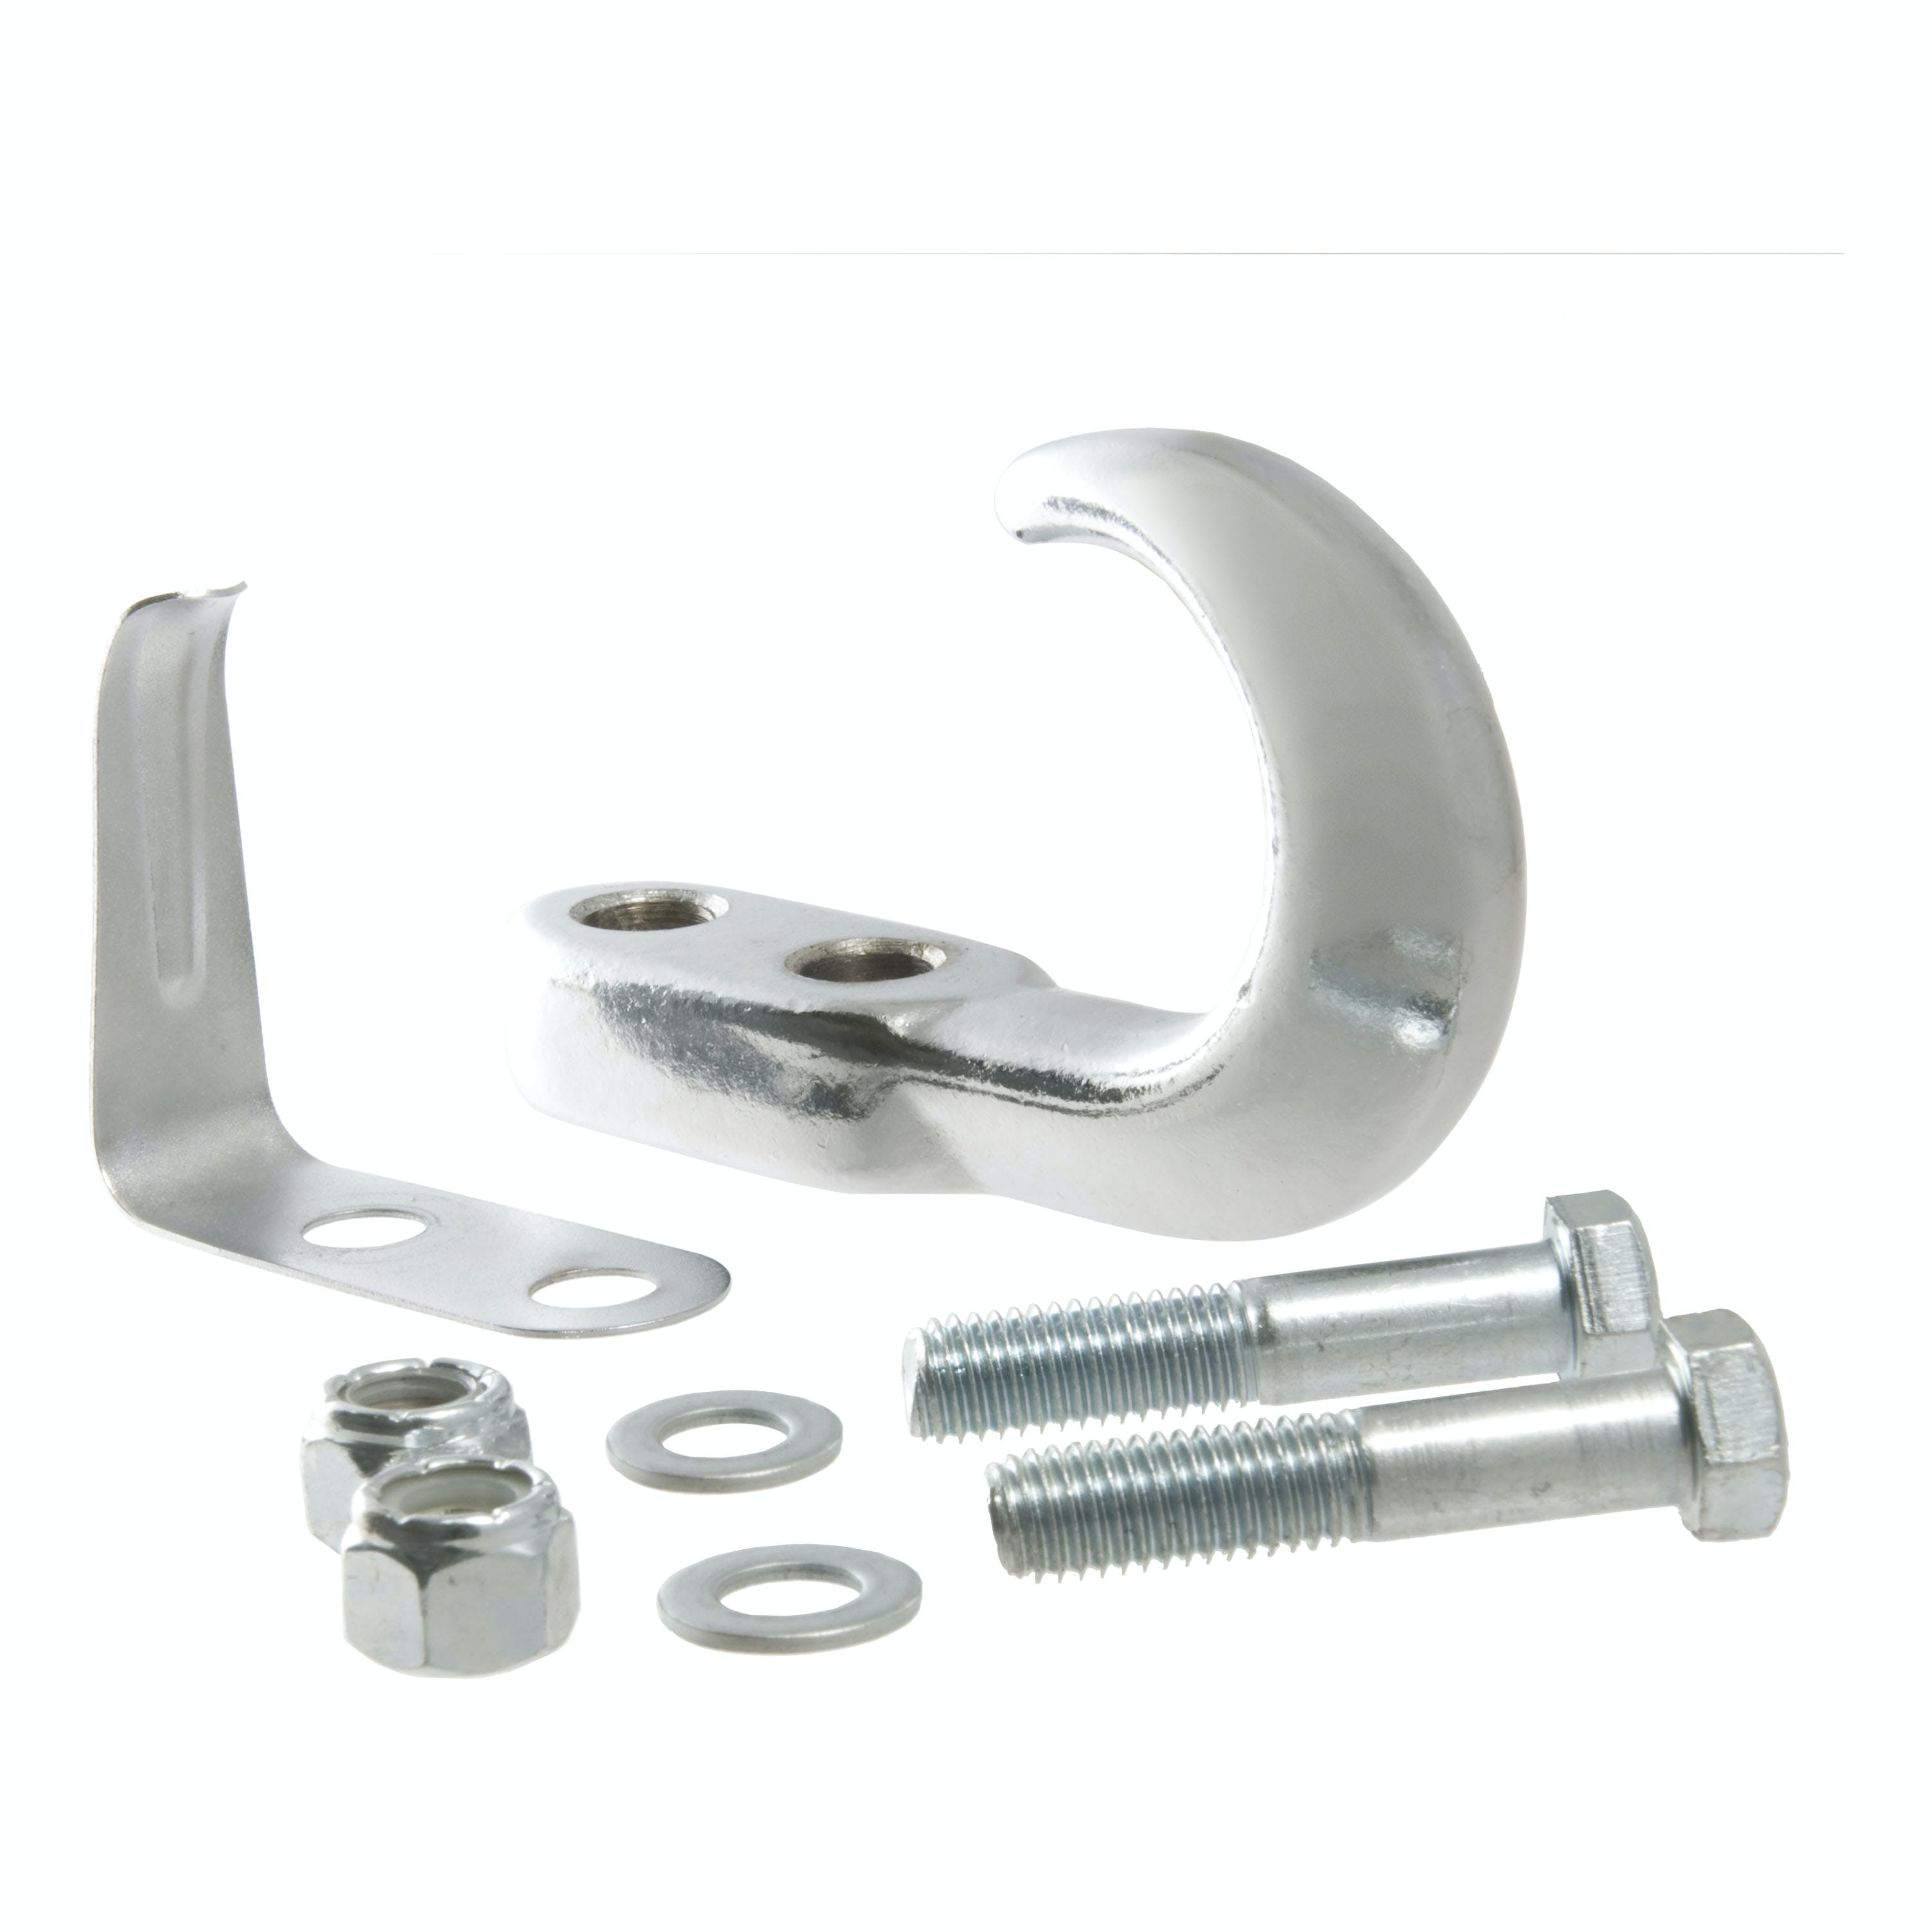 CURT 22401 Tow Hook with Hardware (10,000 lbs., Chrome)